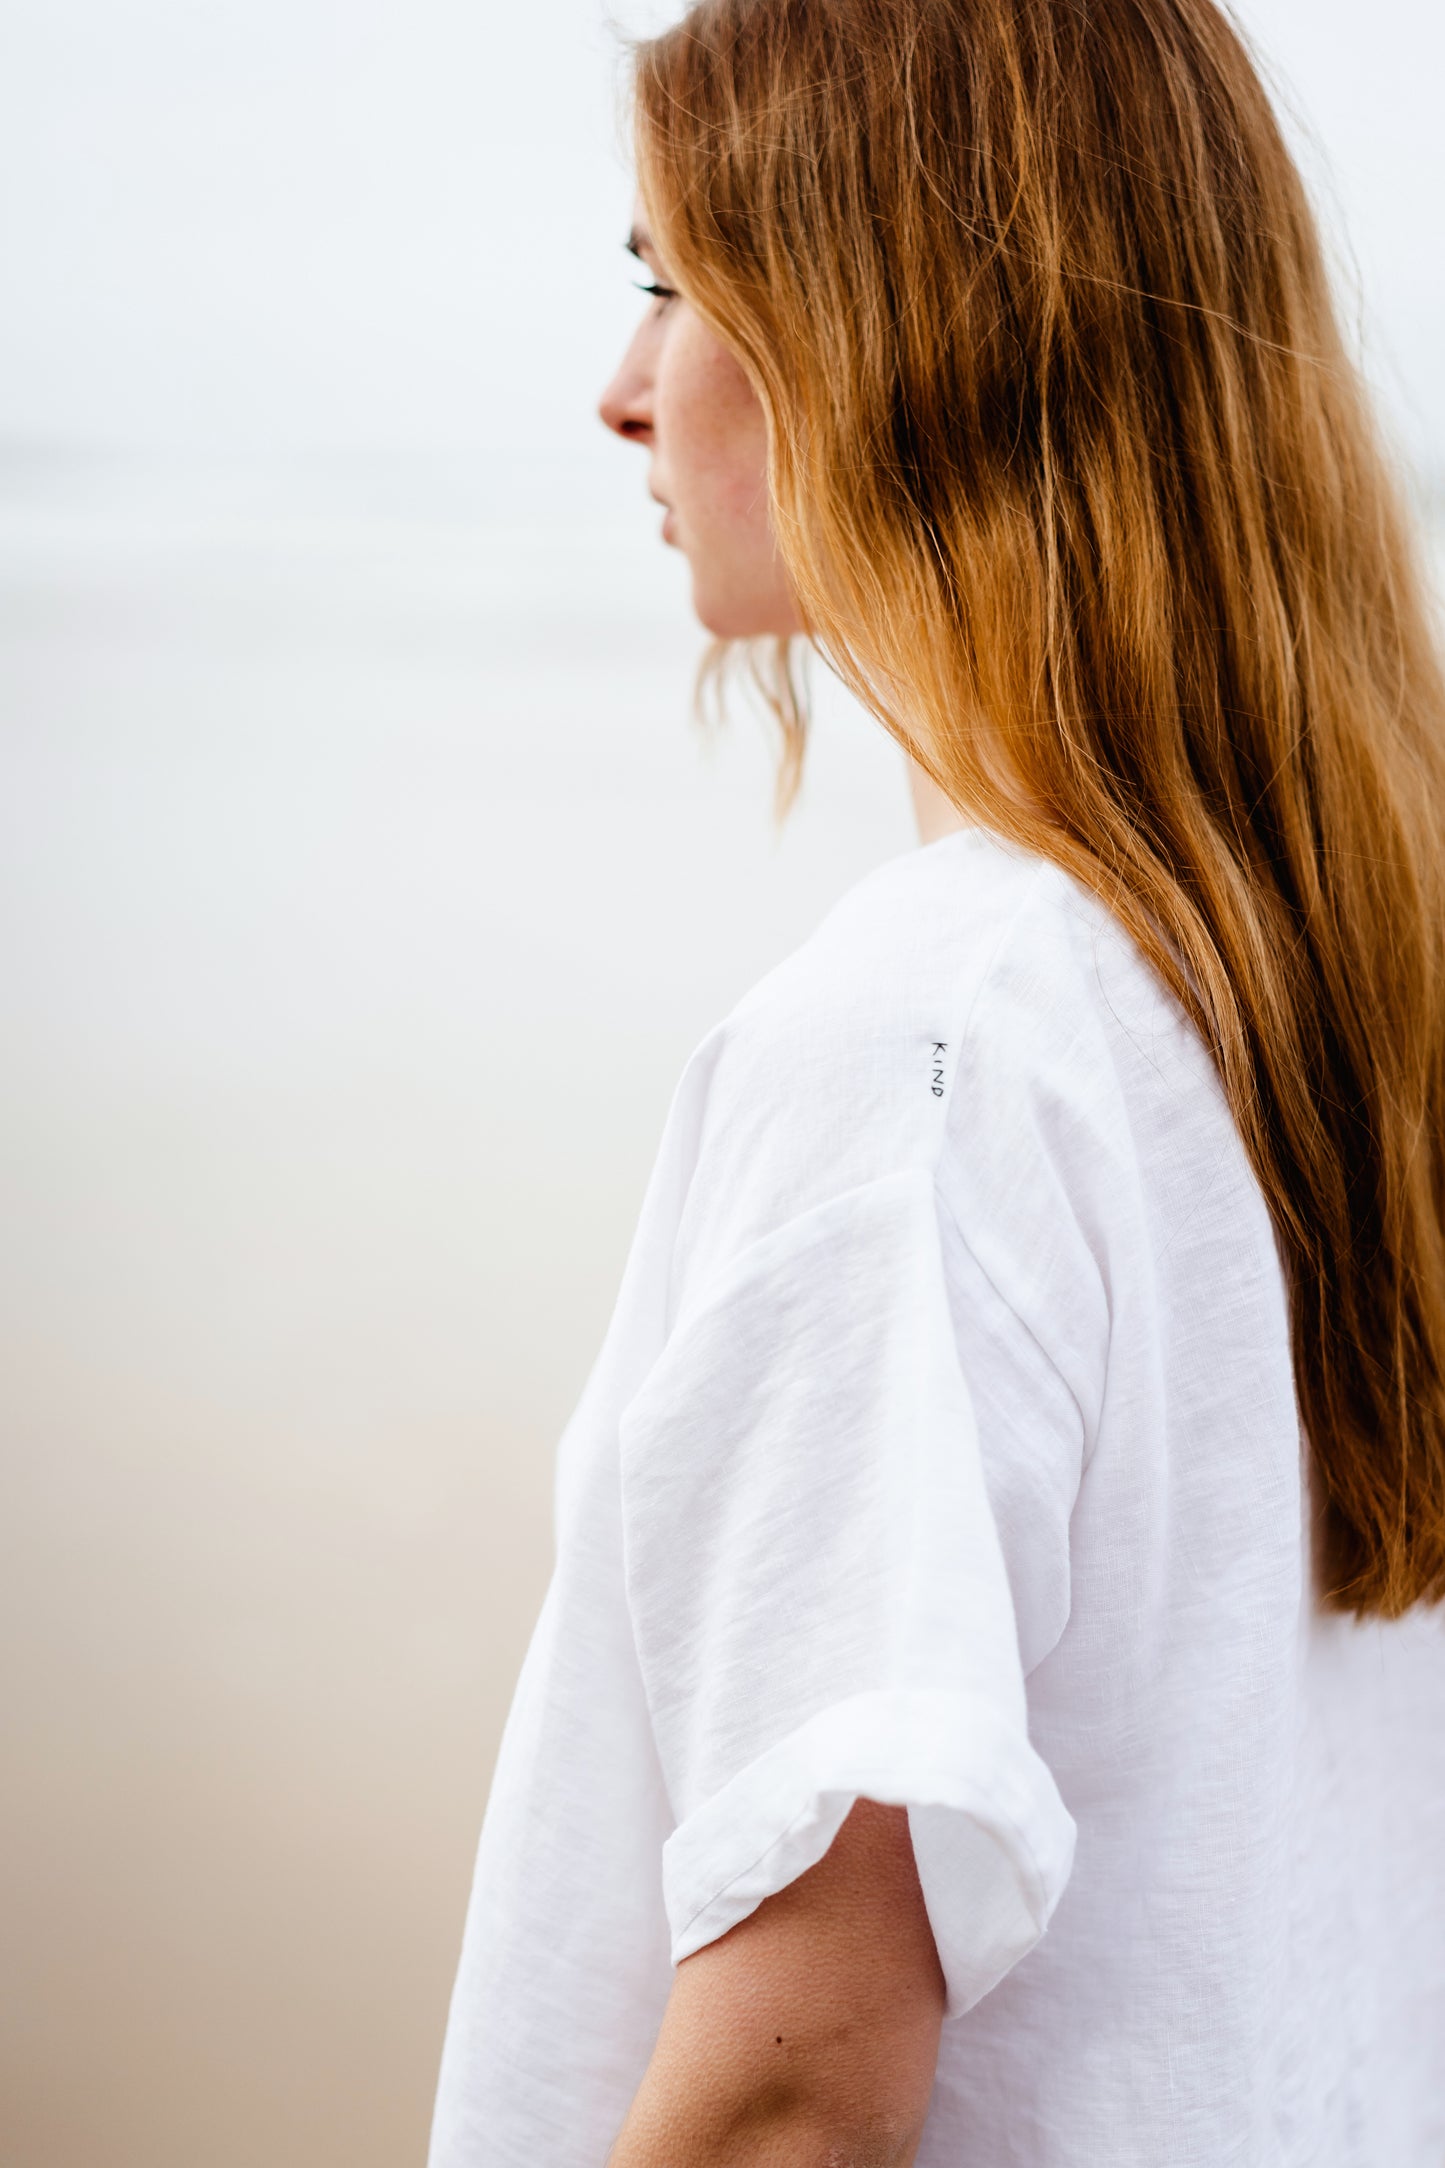 KIND TEE | WHITE | It's cool to be Kind Kind, the first four letters of our brand name - and what we hope to embody! The Kind Tee is a classic staple. Wear with 'V' at front or at the back for a higher neck line- a perfect layering piece. The tee features